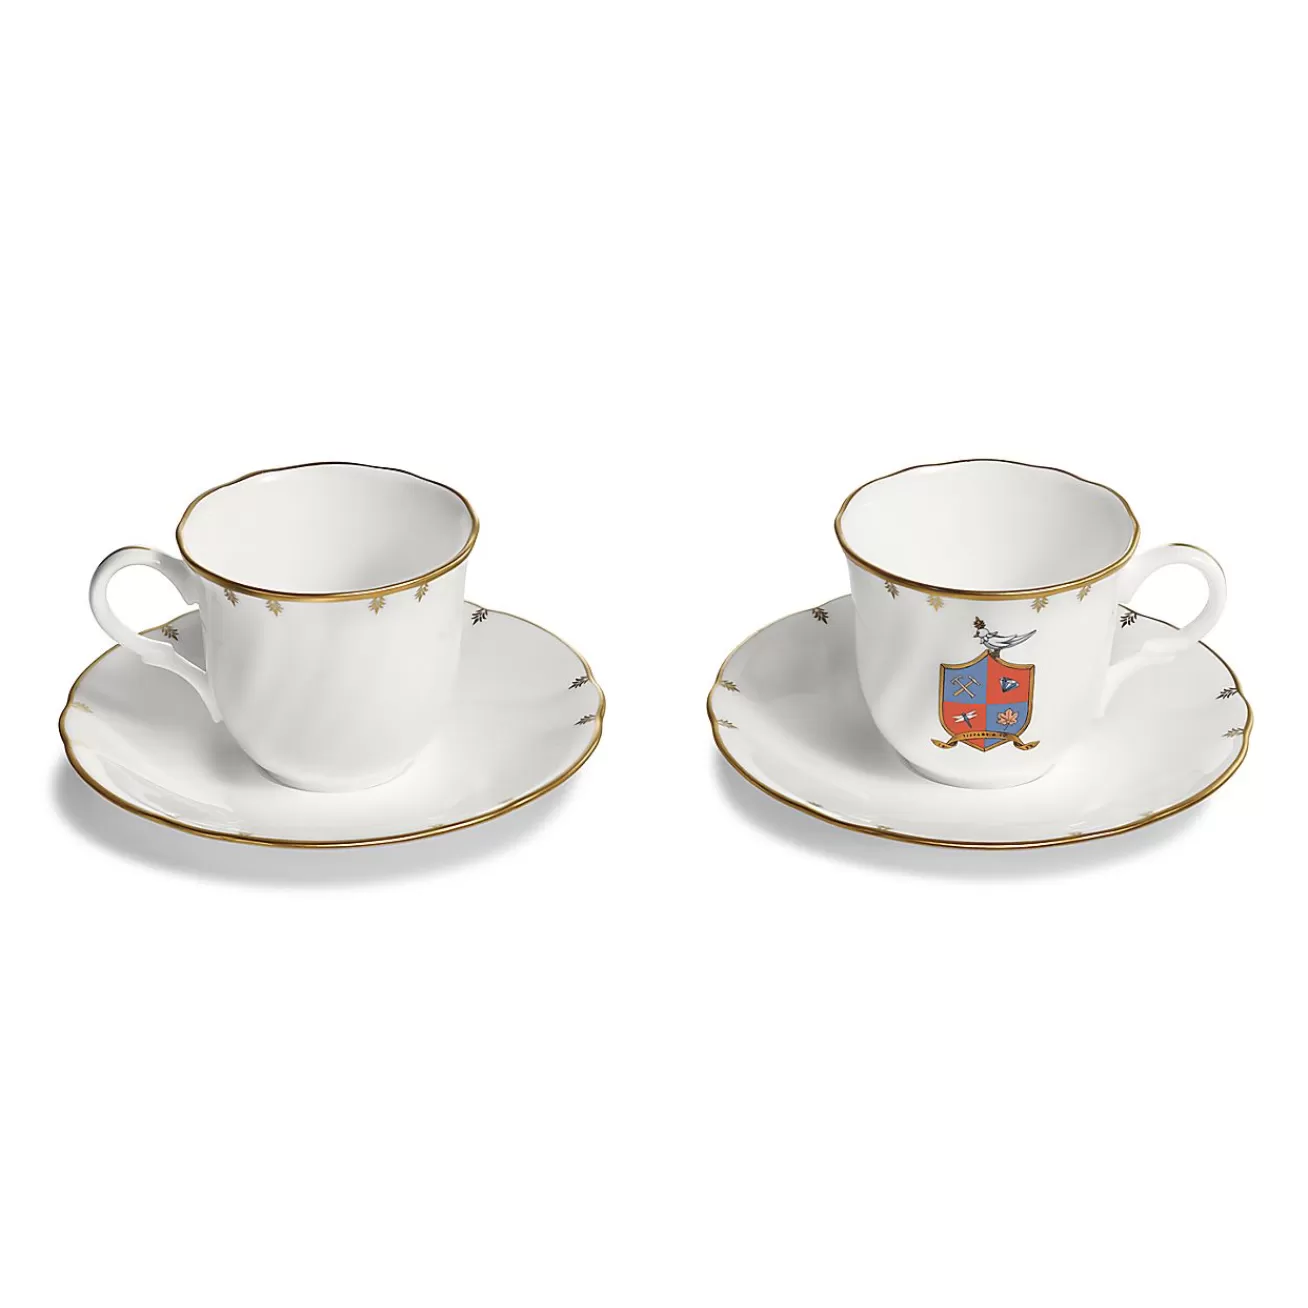 Tiffany & Co. Tiffany Crest Espresso Cups Set of Two, in Bone China | ^ The Home | Housewarming Gifts